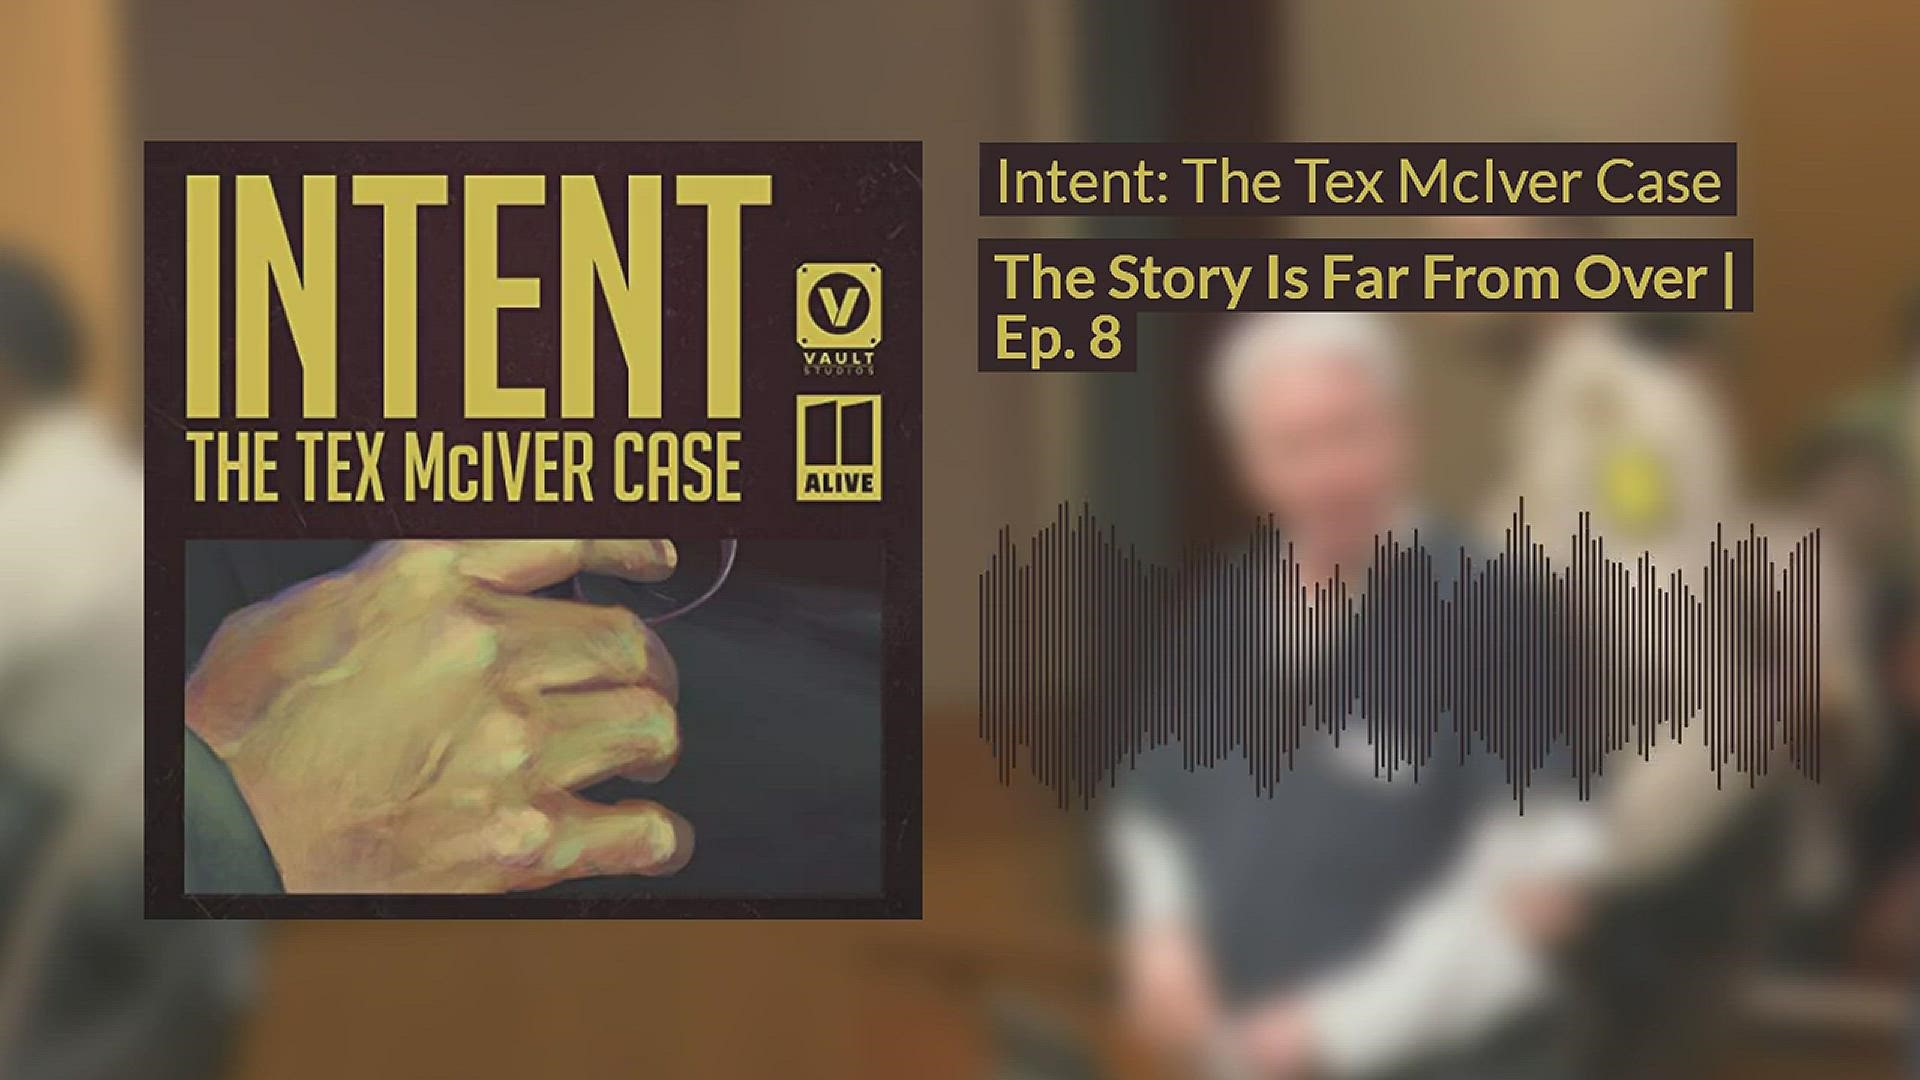 Four years after his sentencing, Tex McIver gets his murder conviction overturned.